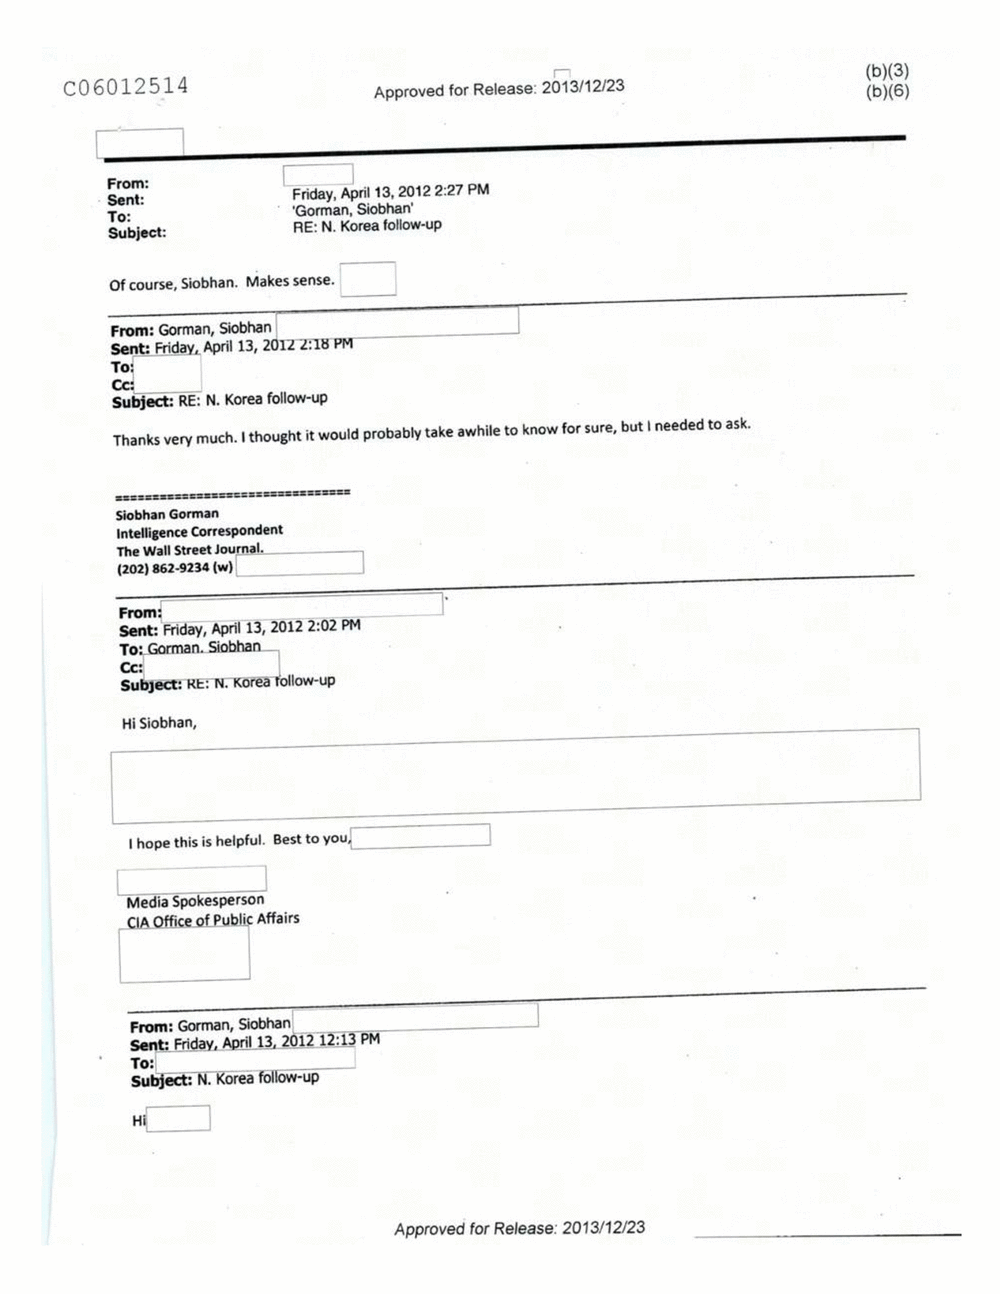 Page 30 from Email Correspondence Between Reporters and CIA Flacks